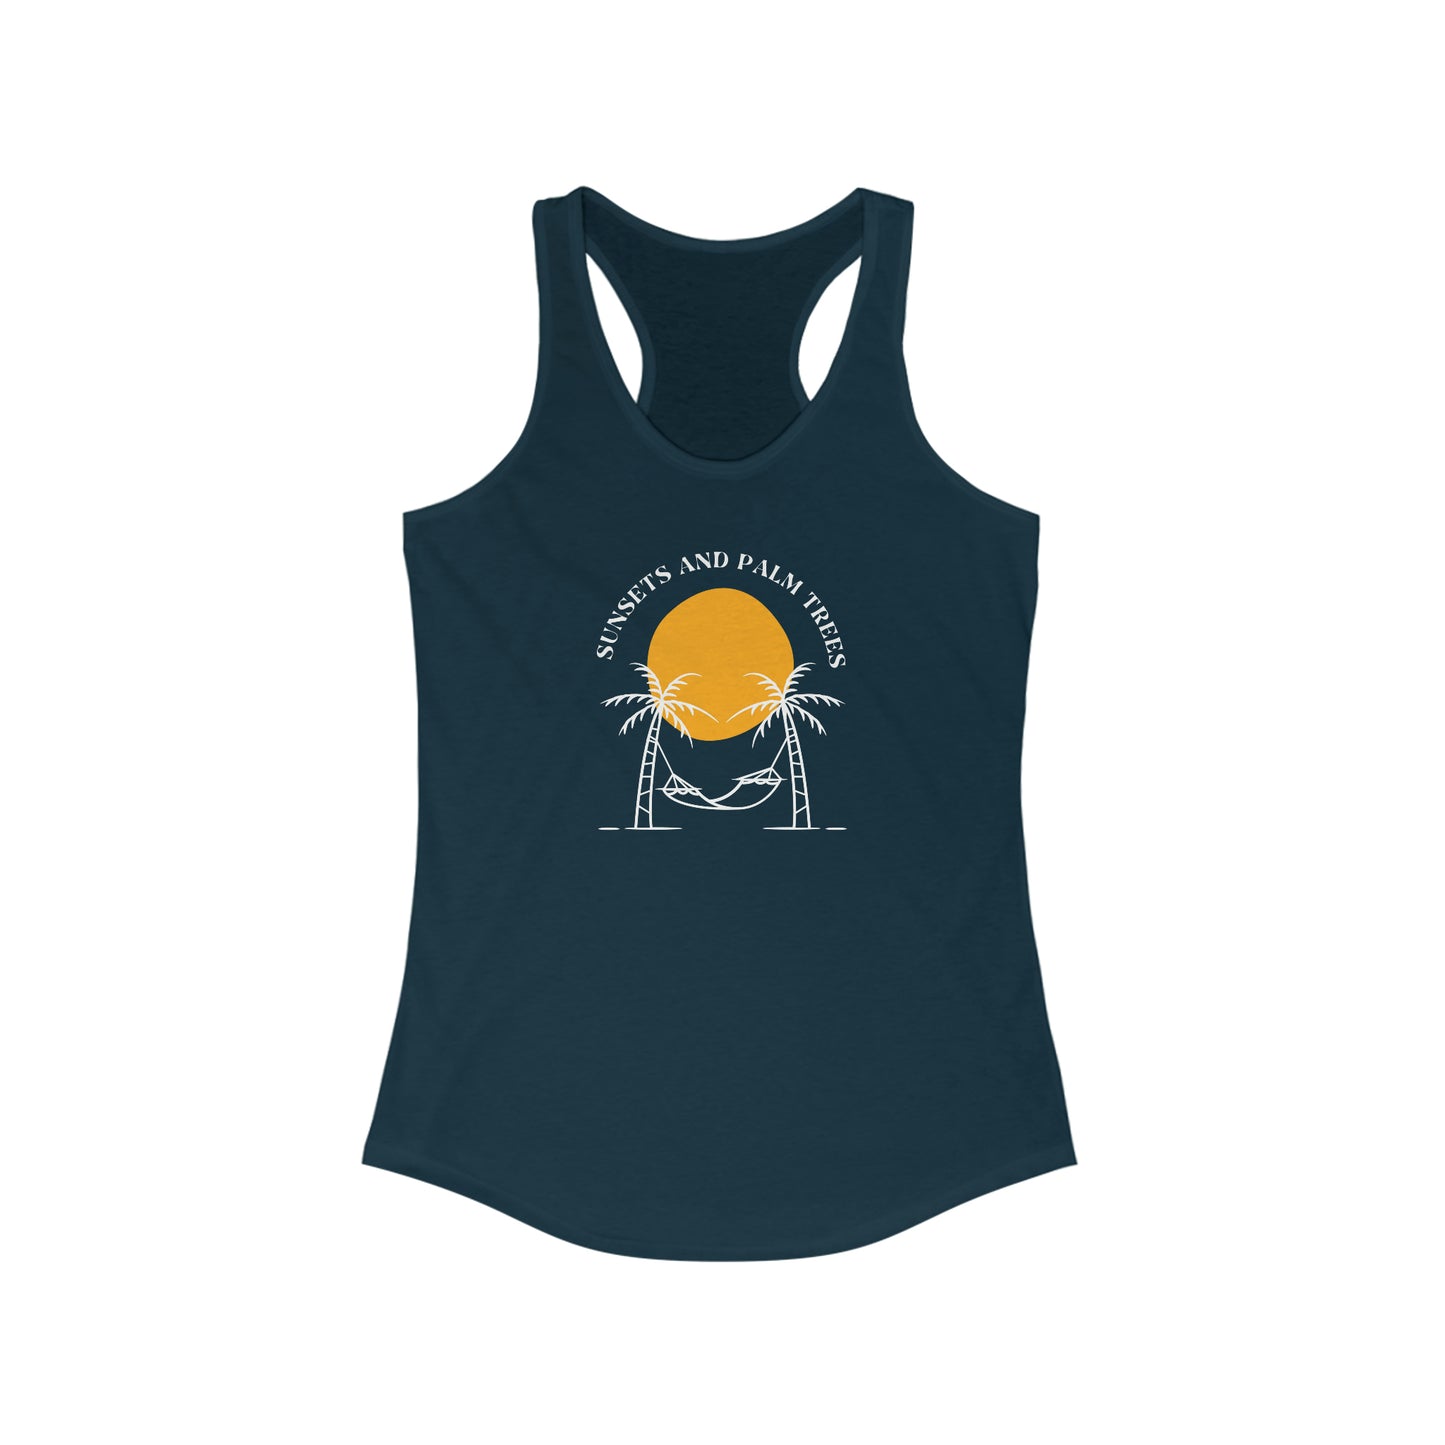 Sunsets and Palm Trees Women's Ideal Racerback Tank